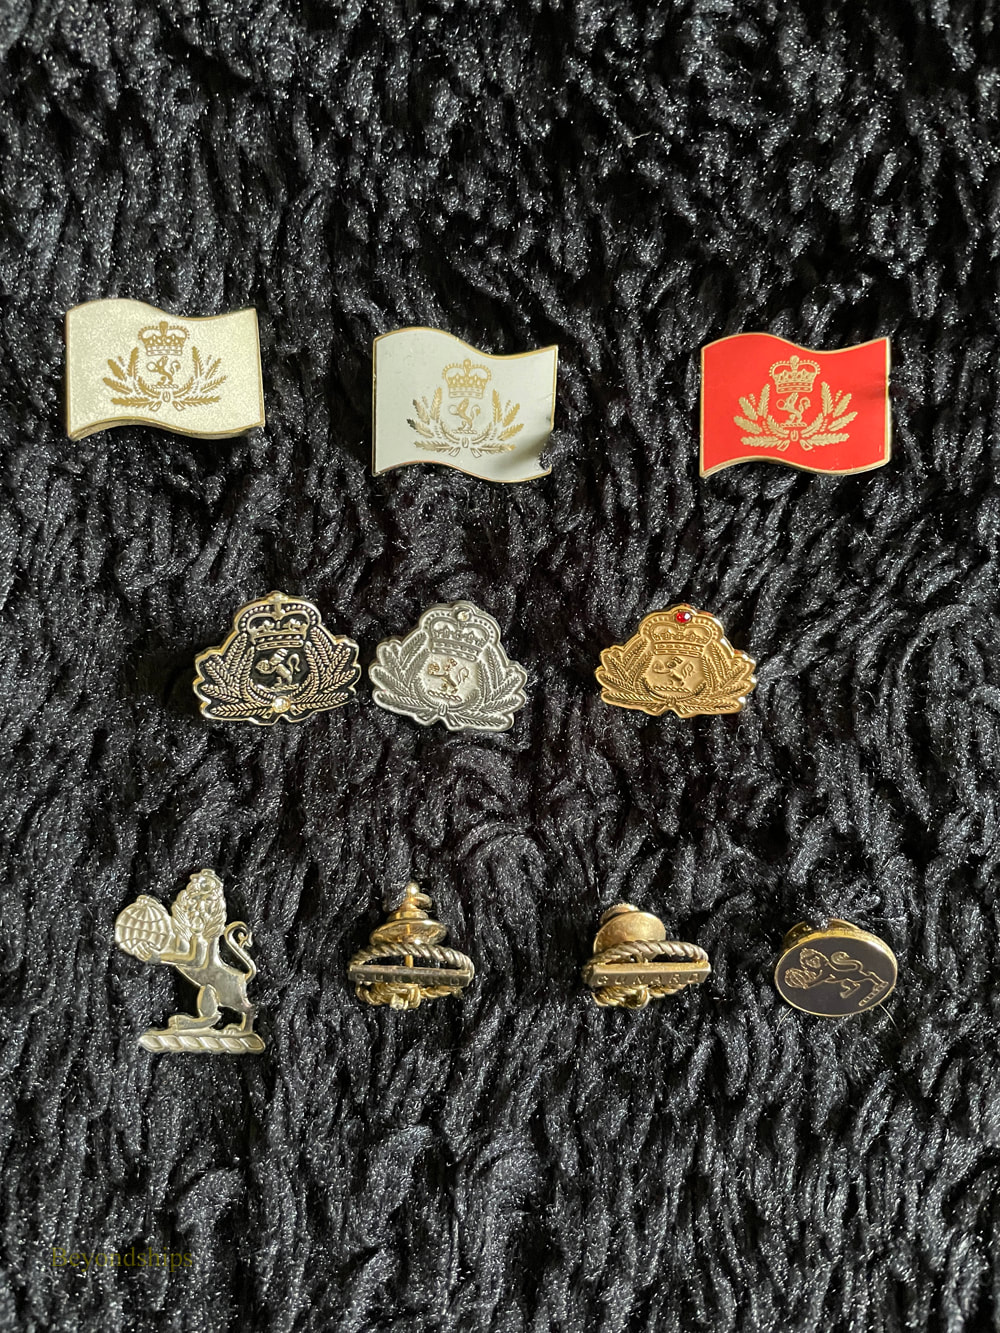 A collection of pins issued by Cunard Line 